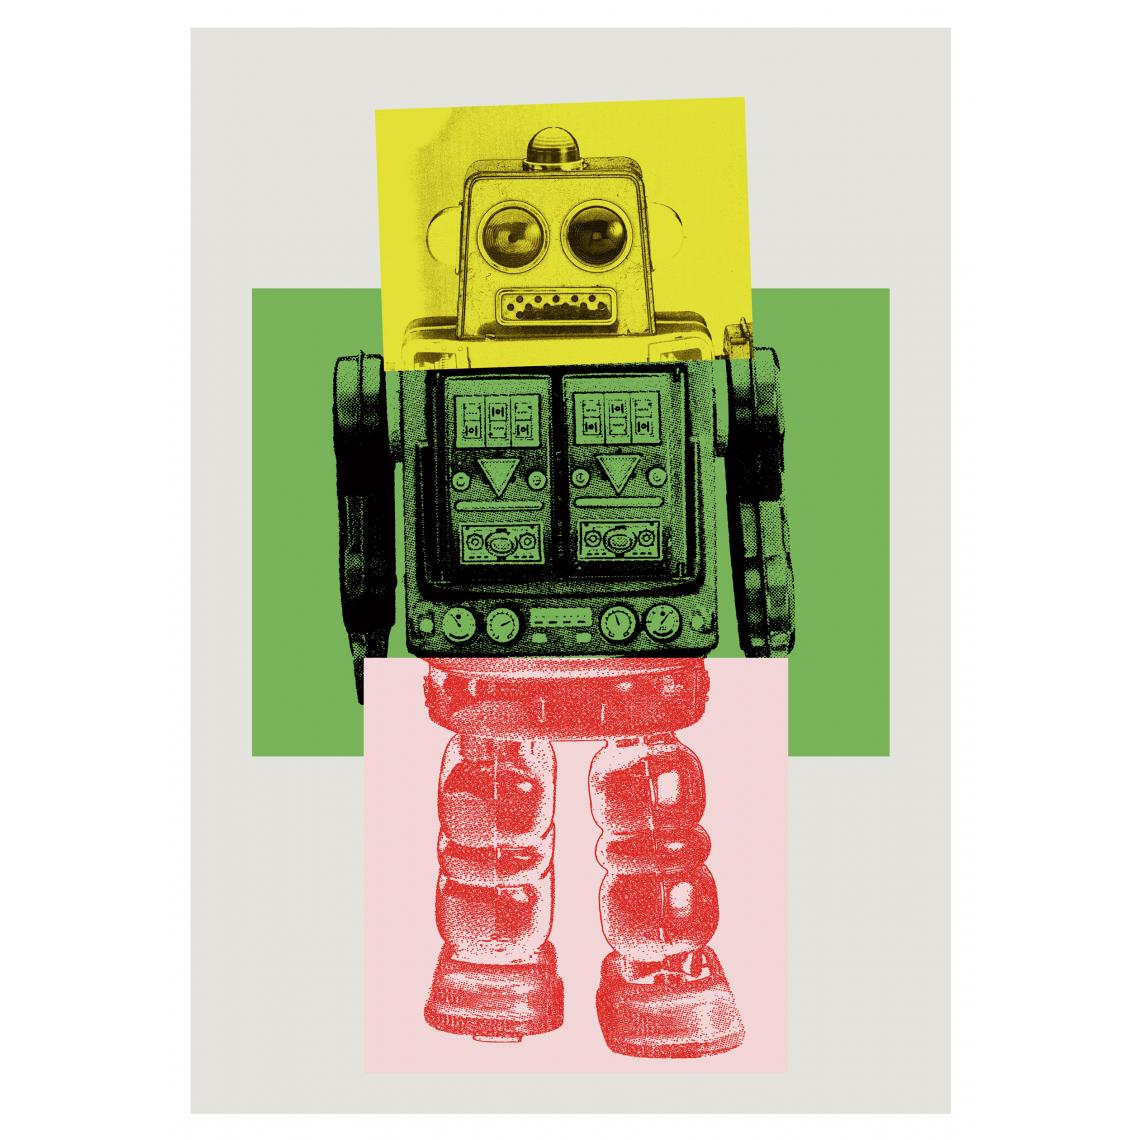 Beneffito - KIDS - Signature Poster - Robot_2 - 60x80 cm - Affiches, posters